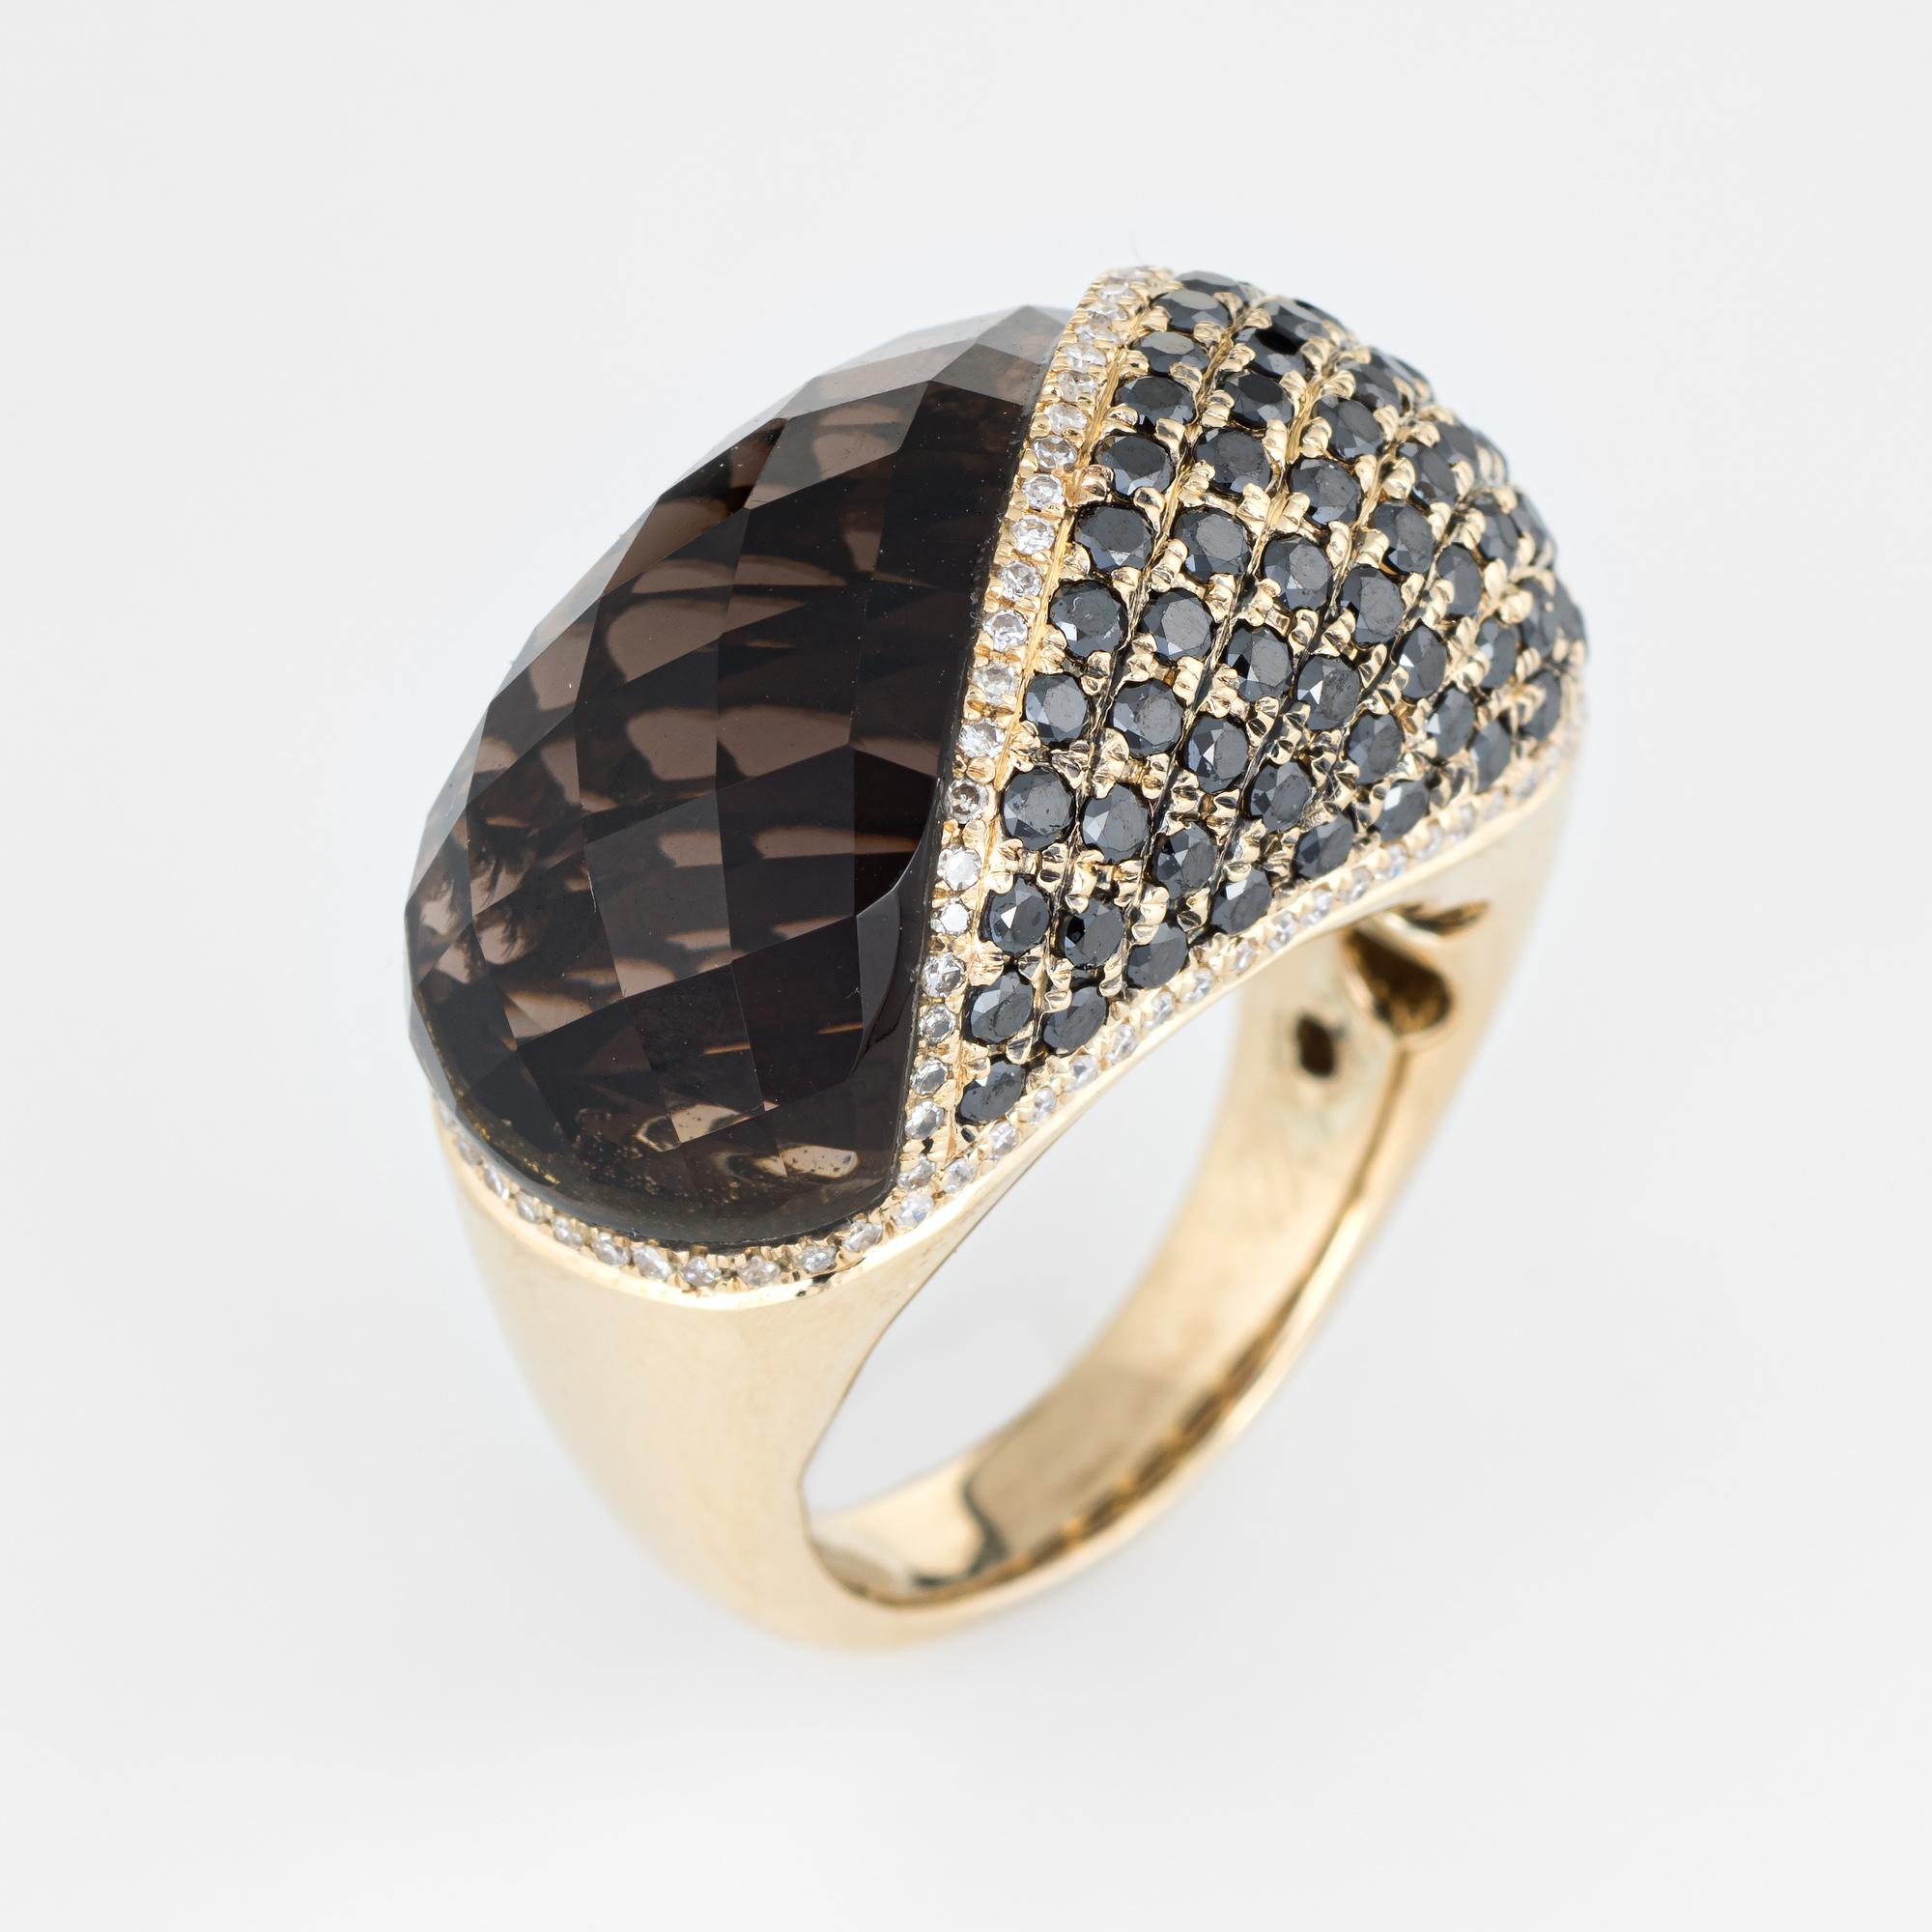 Stylish smoky quartz & diamond domed cocktail ring crafted in 14 karat yellow gold. 

Black diamonds total an estimated 0.72 carats, accented with 0.51 carats of white diamonds (estimated at I-J color and SI1-I1 clarity). The checkerboard faceted